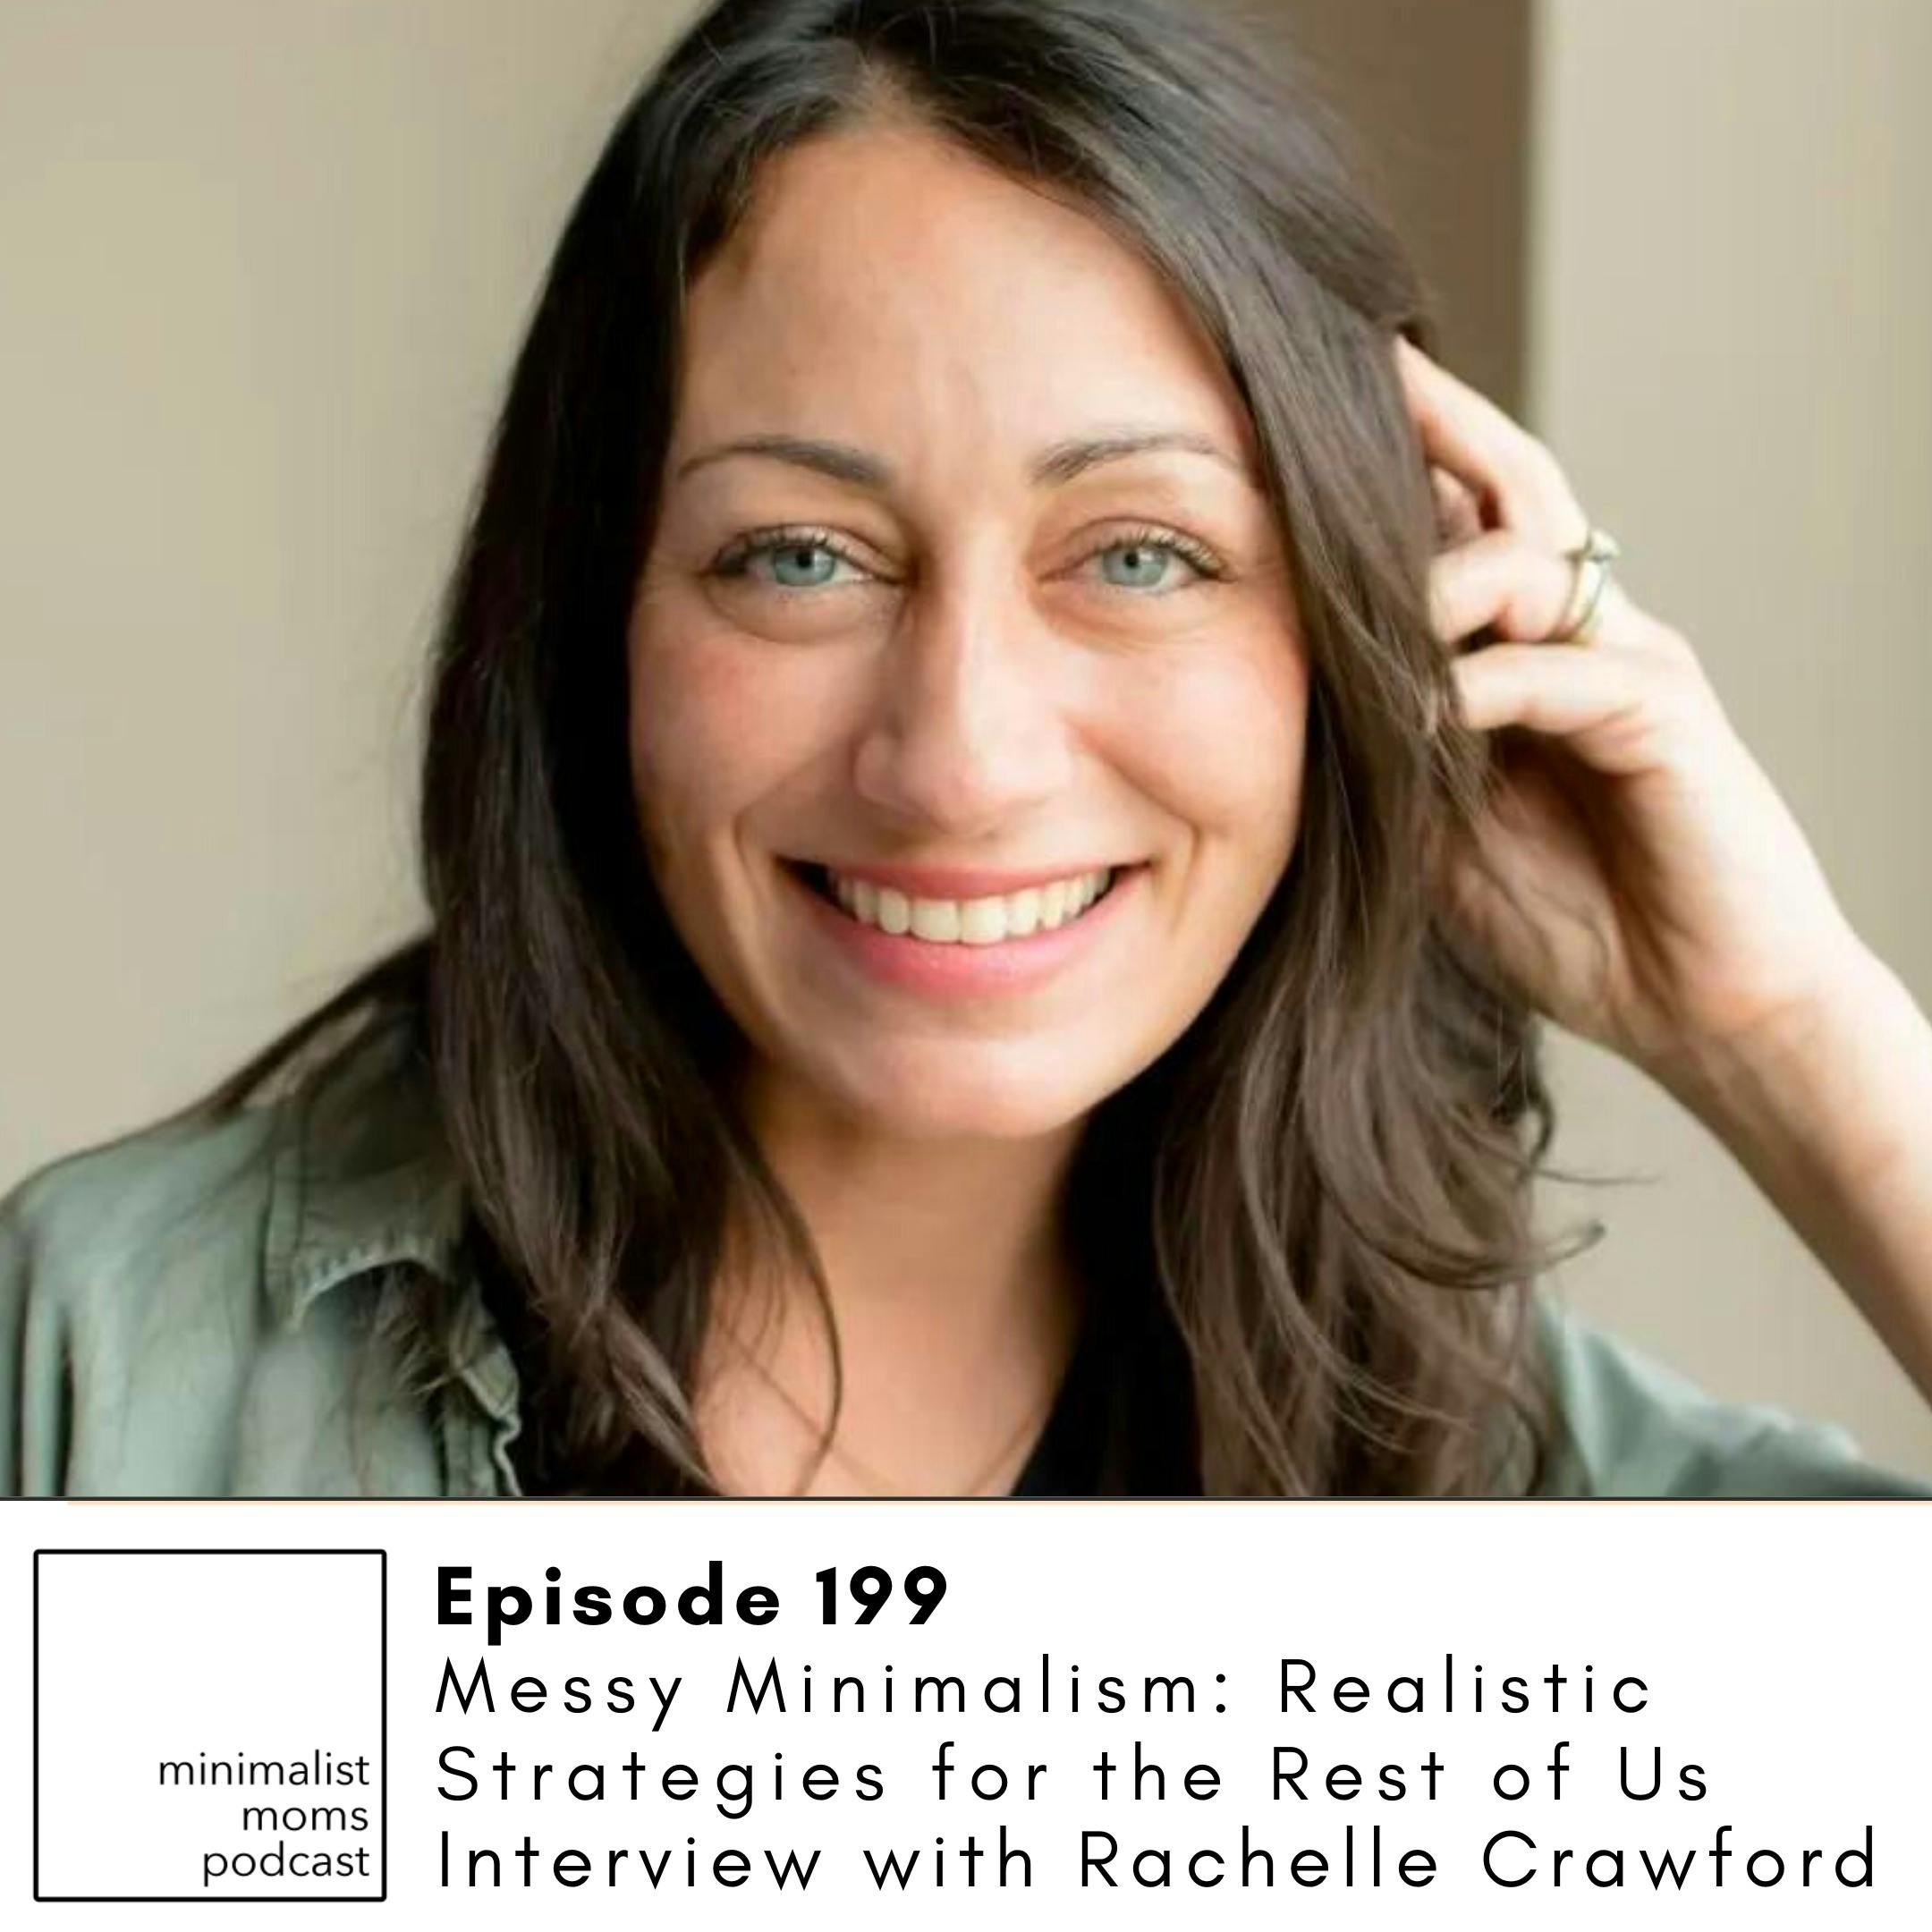 EP199: Messy Minimalism: Realistic Strategies for the Rest of Us with Rachelle Crawford